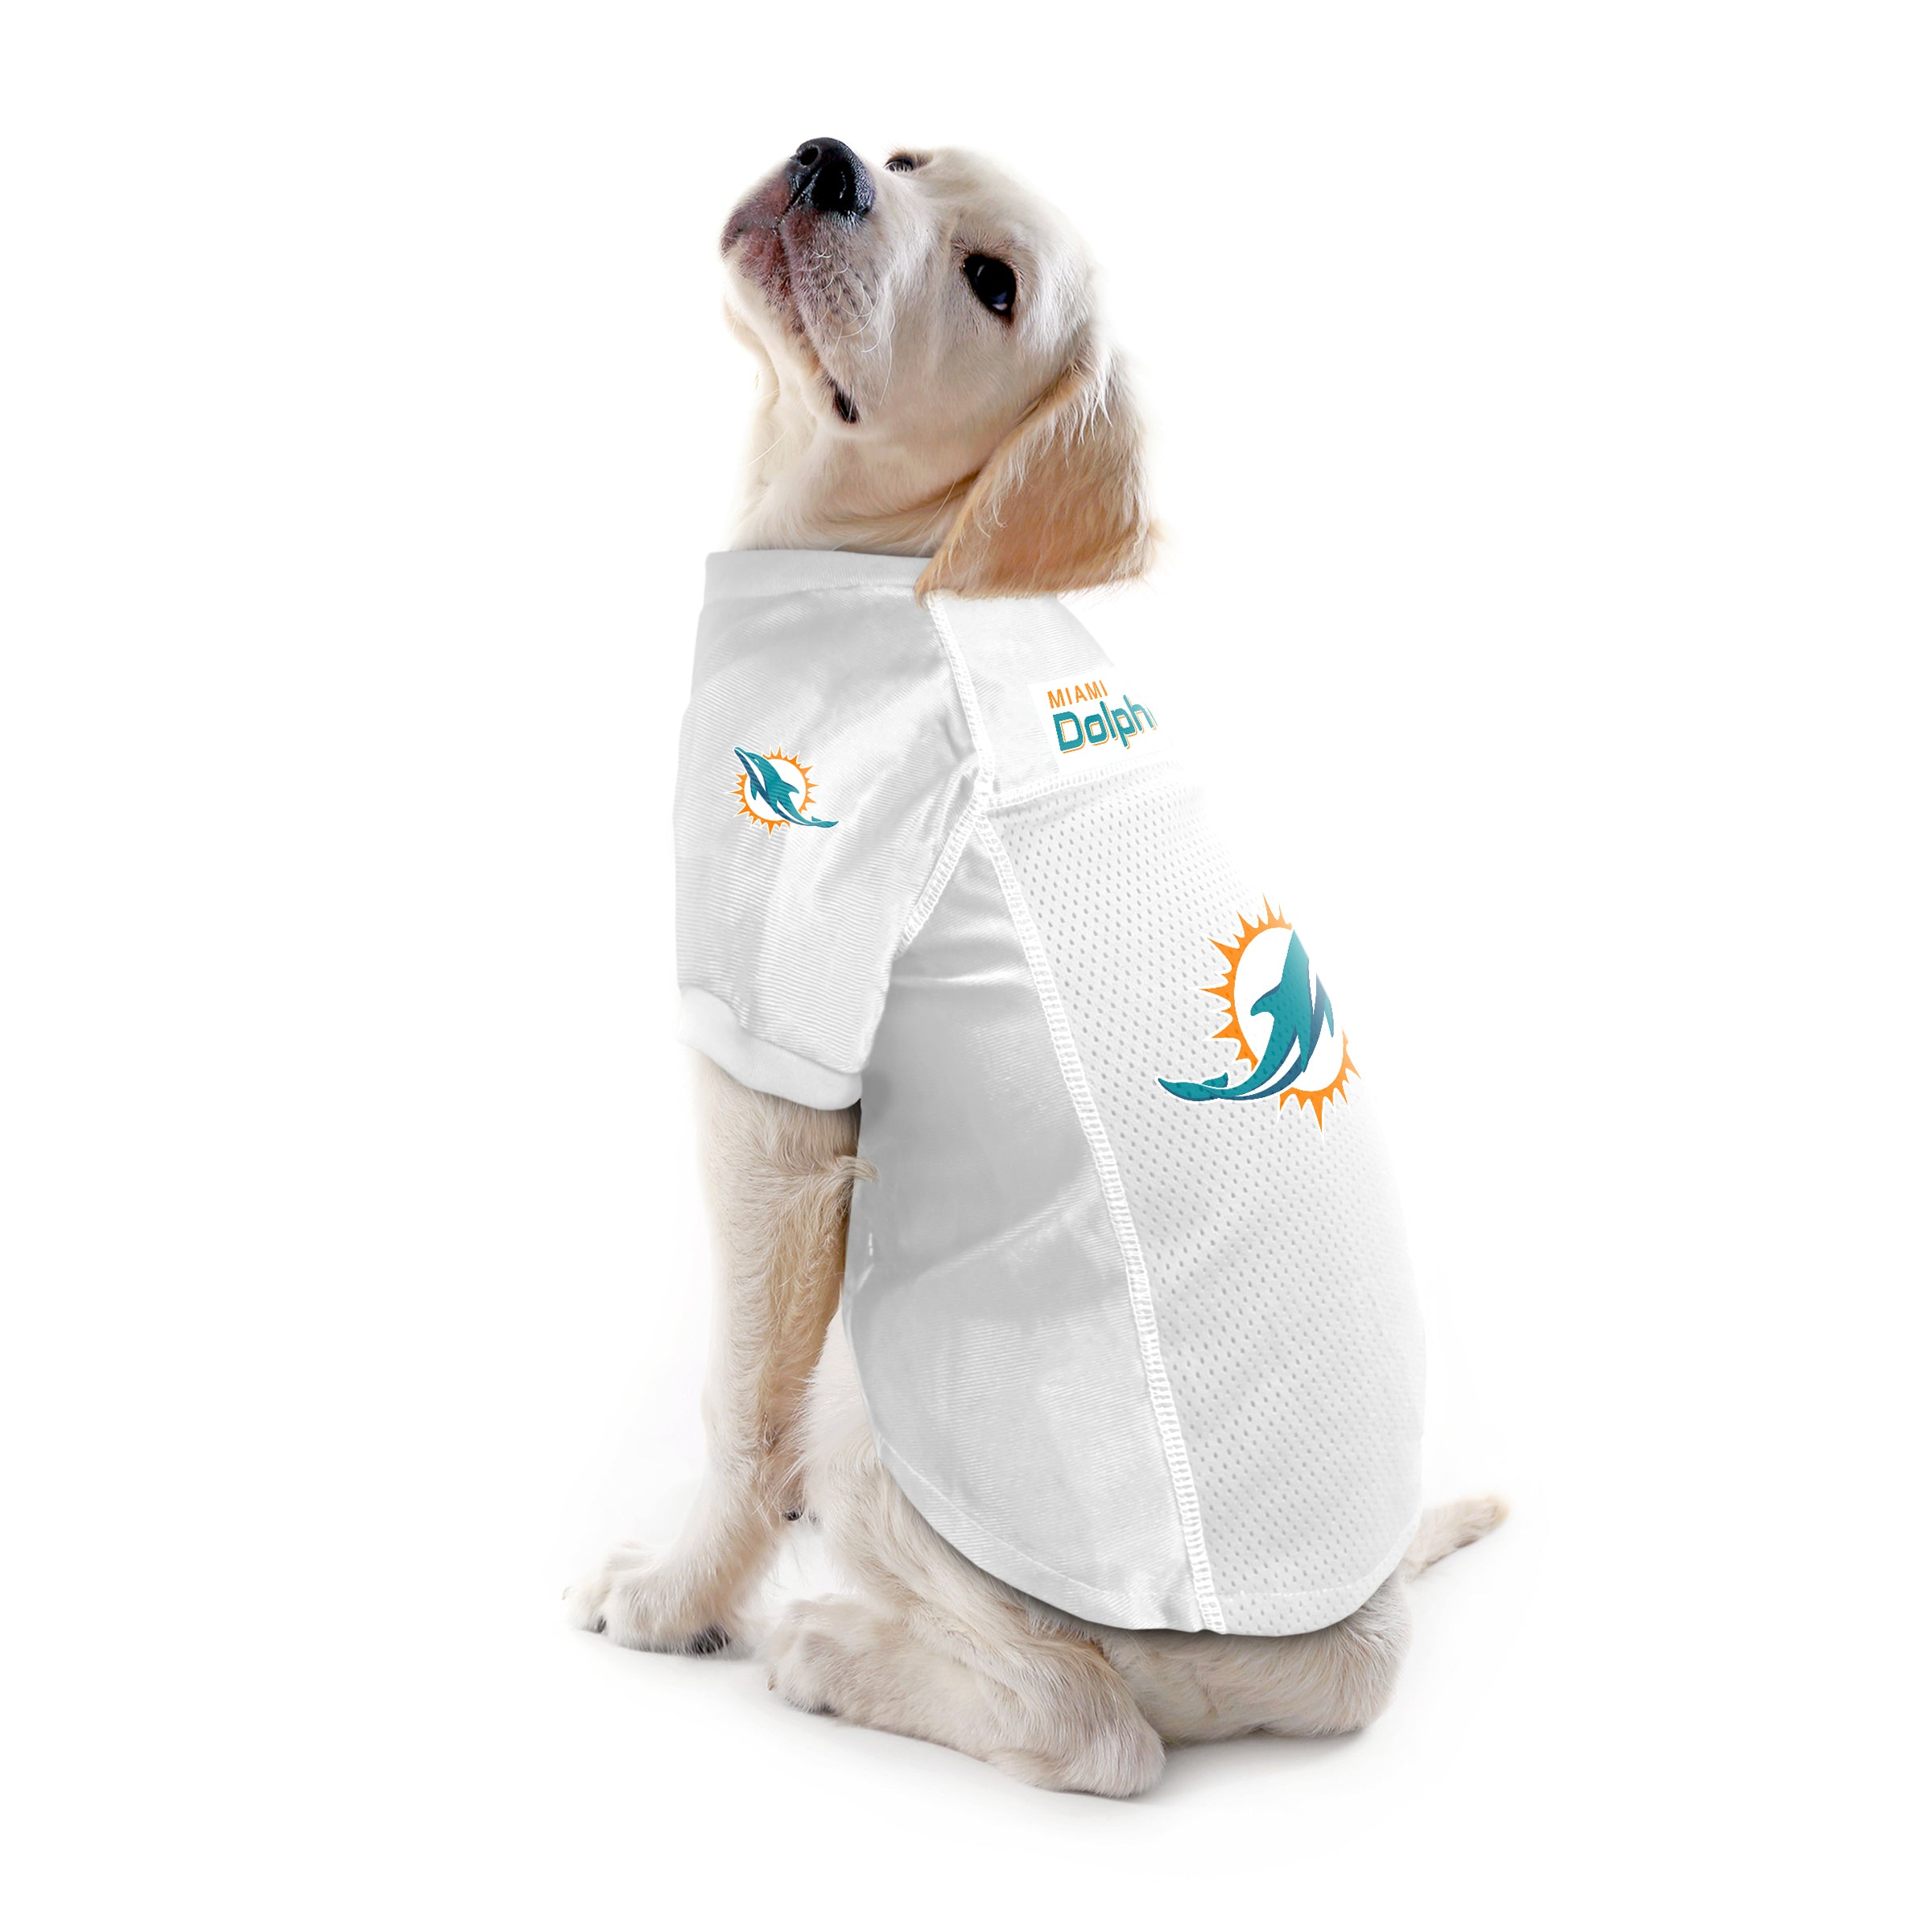 Miami Dolphins Dog Jersey - Large